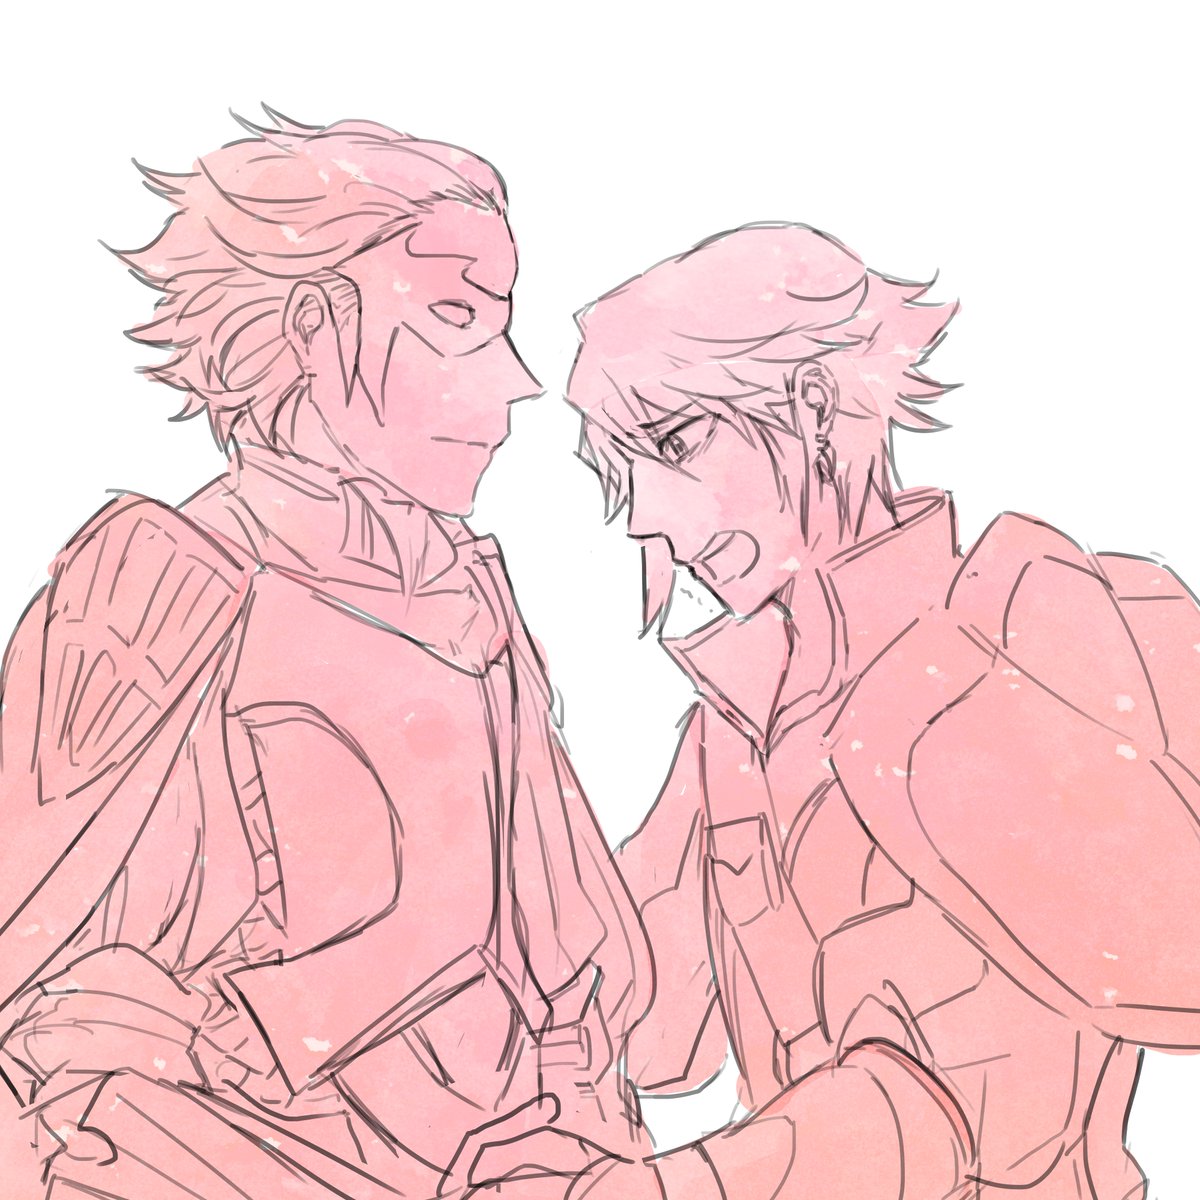 10. Gerome/Inigo"I don’t want to part with everyone until the end, but to leave someone else behind, I don’t want that even more."